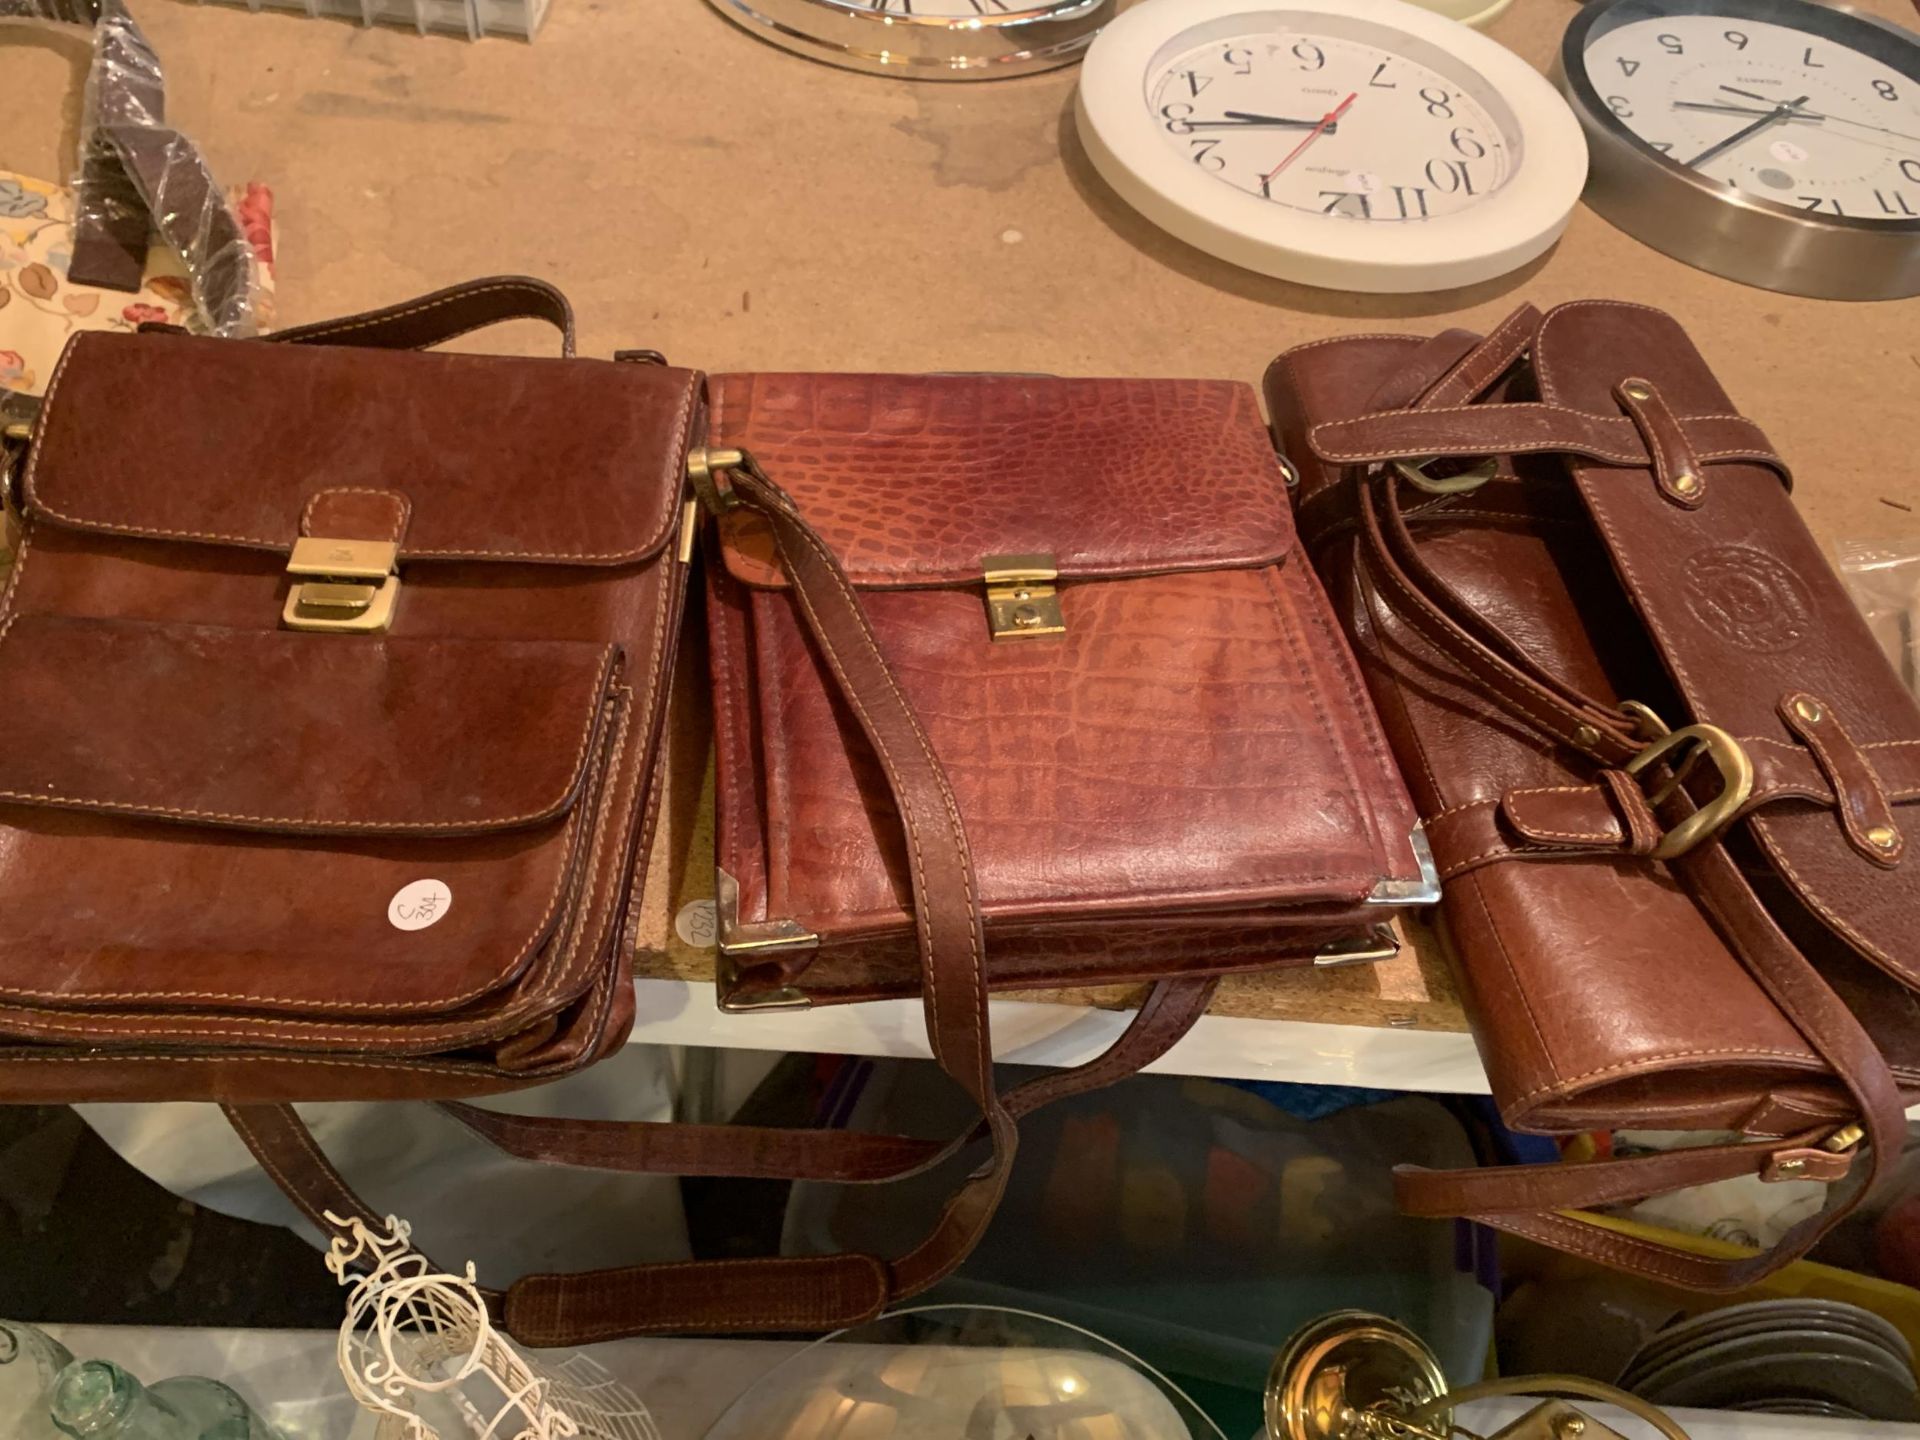 THREE BROWN LEATHER CROSS BODY BAGS